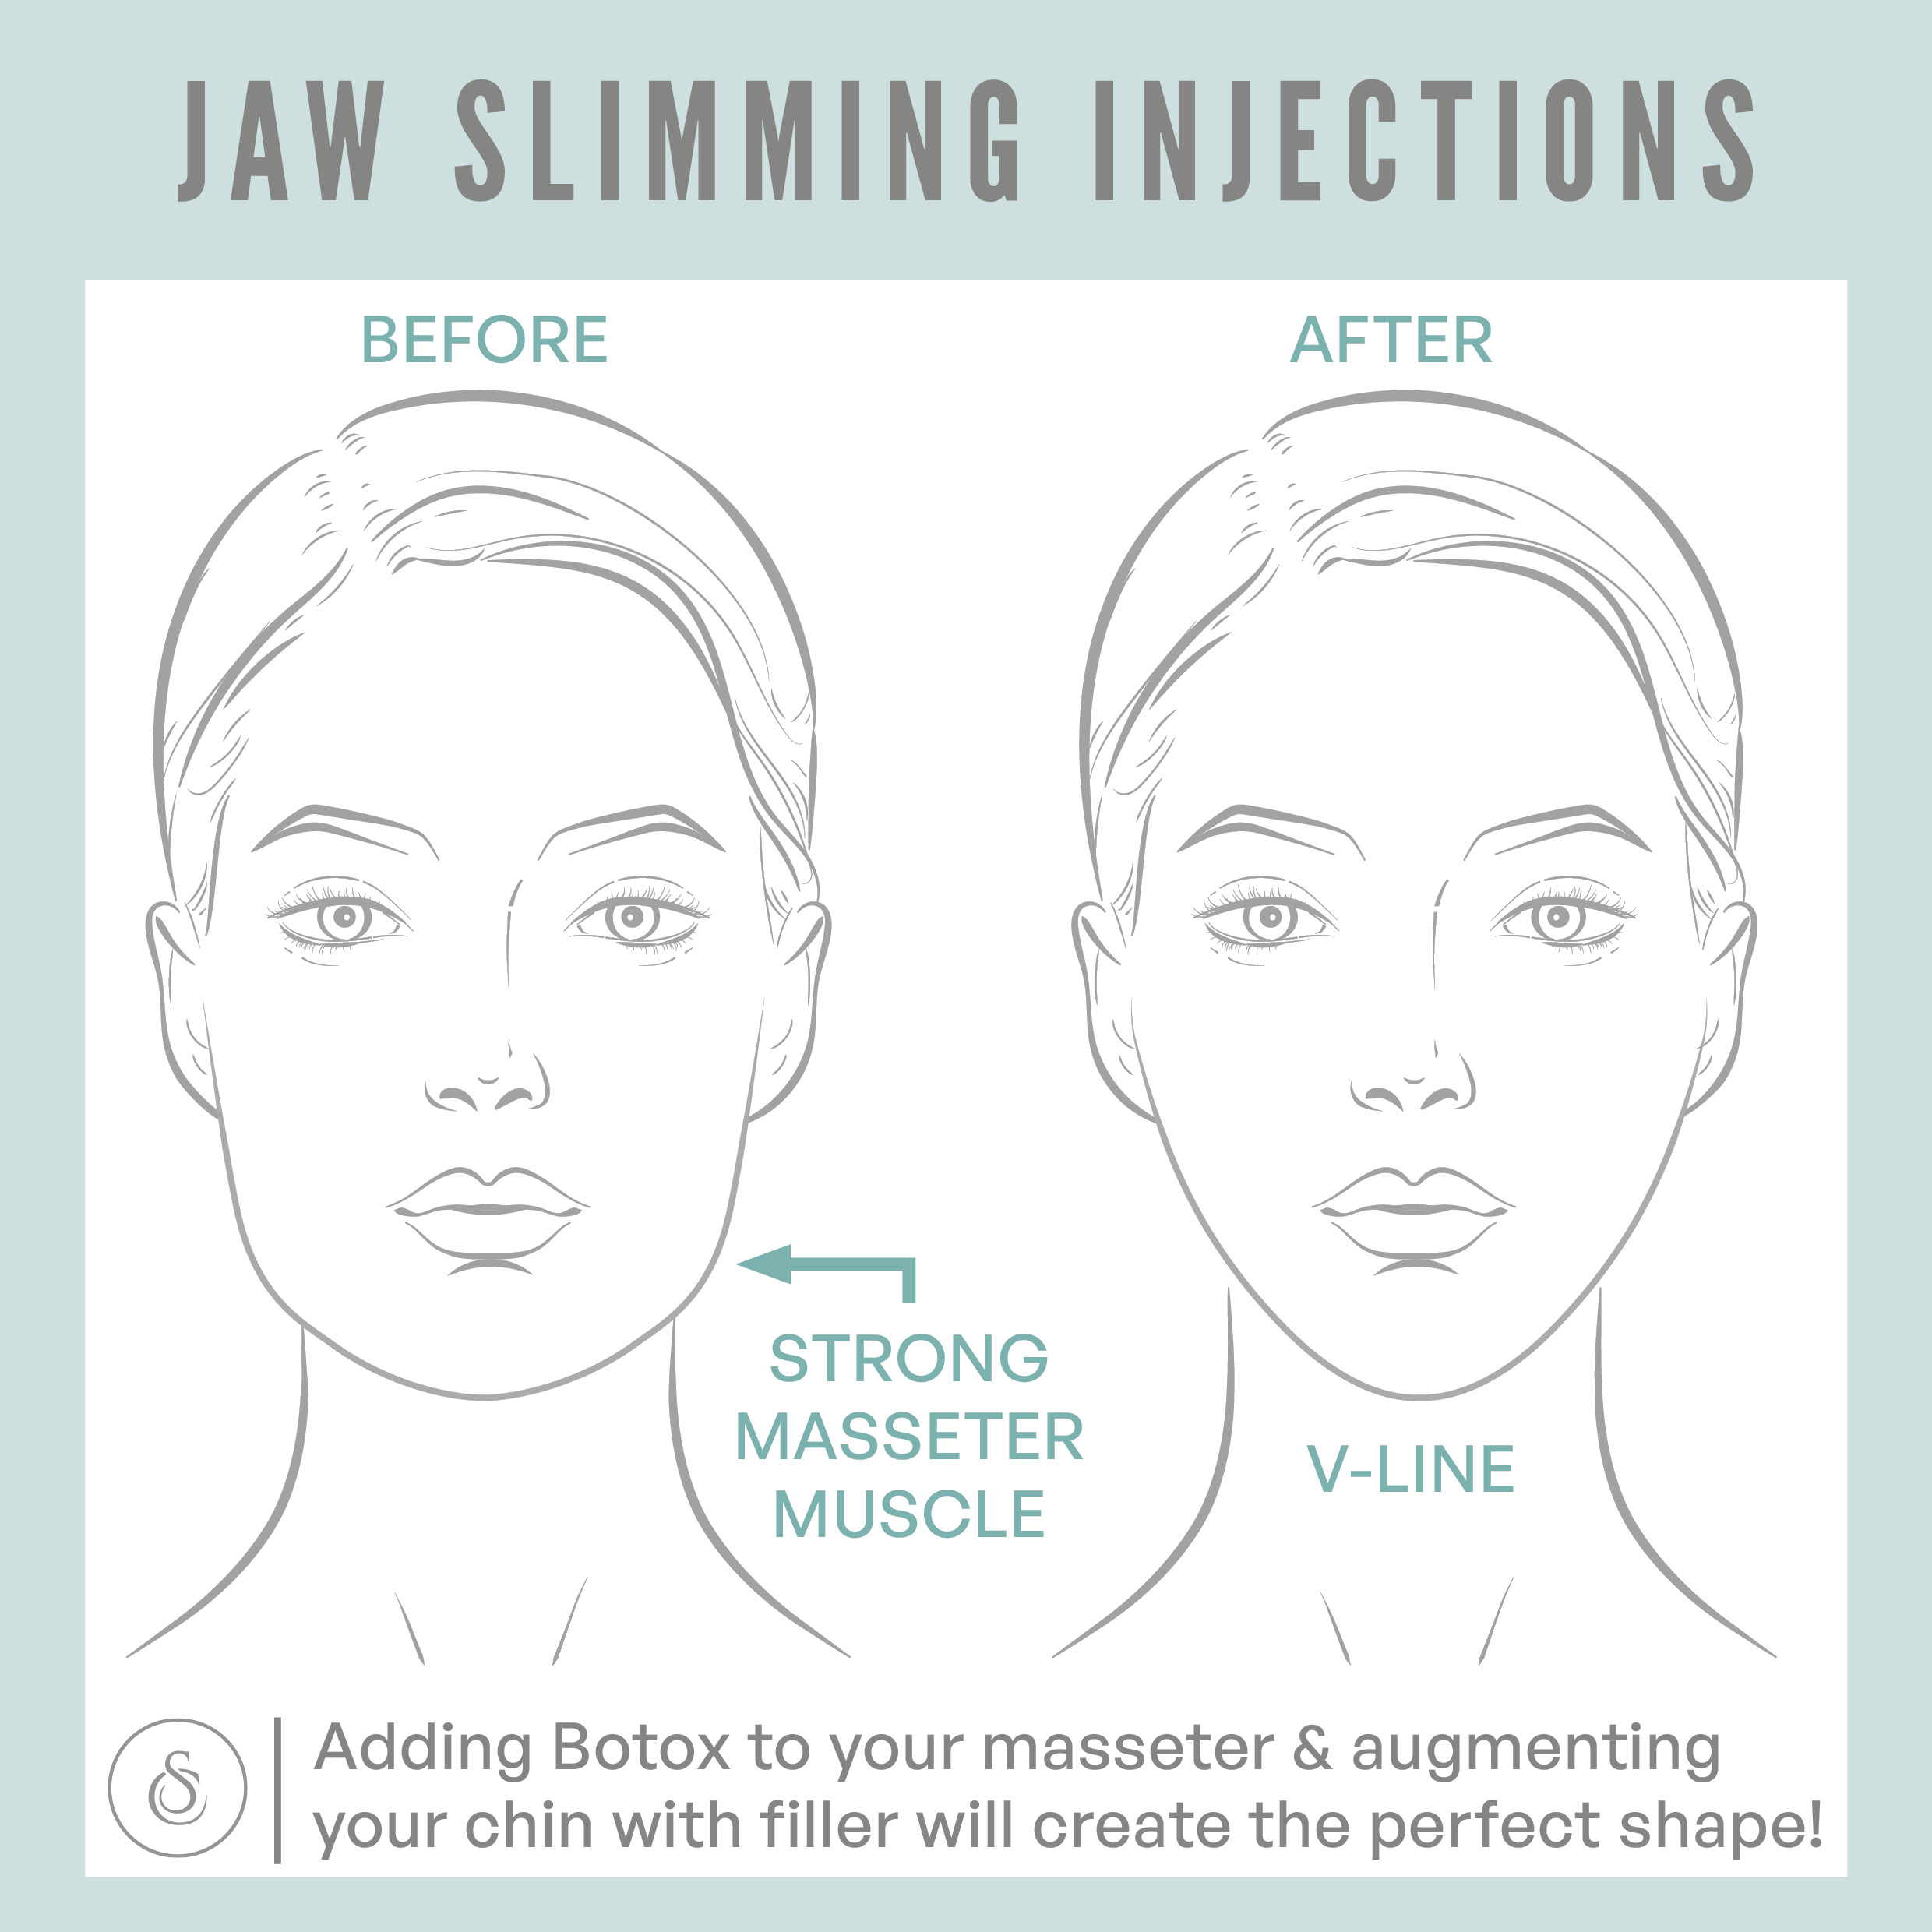 Sarasin Clinic Jaw Slimming Injections